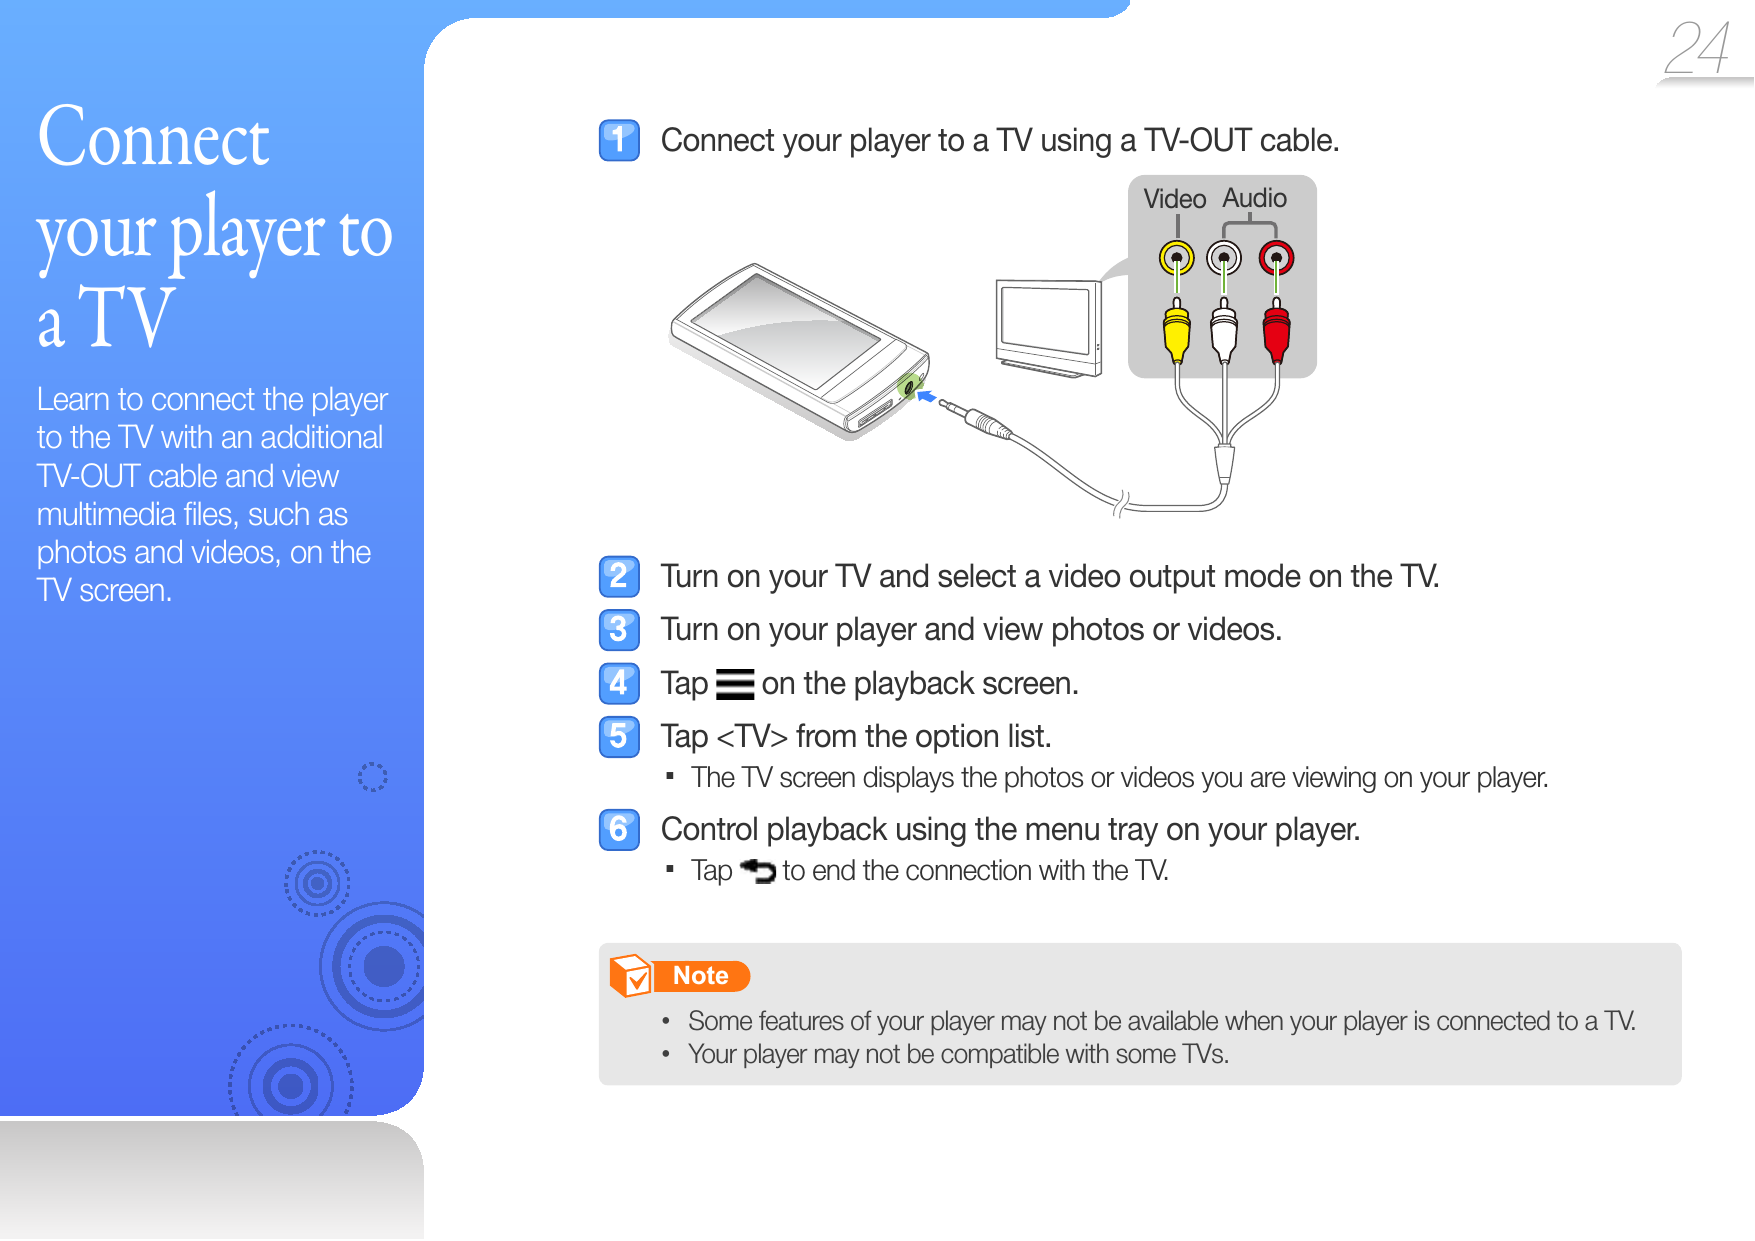 24  C o n n e c t  your player to a TVLearn to connect the player to the TV with an additional  TV-OUT cable and view multimedia ﬁ les, such as photos and videos, on the TV screen.  Connect your player to a TV using a TV-OUT cable.AudioVideo  Turn on your TV and select a video output mode on the TV.  Turn on your player and view photos or videos. Tap   on the playback screen.  Tap &lt;TV&gt; from the option list.The TV screen displays the photos or videos you are viewing on your player.   Control playback using the menu tray on your player.Tap   to end the connection with the TV.       Note   Some features of your player may not be available when your player is connected to a TV. • Your player may not be compatible with some TVs.• 